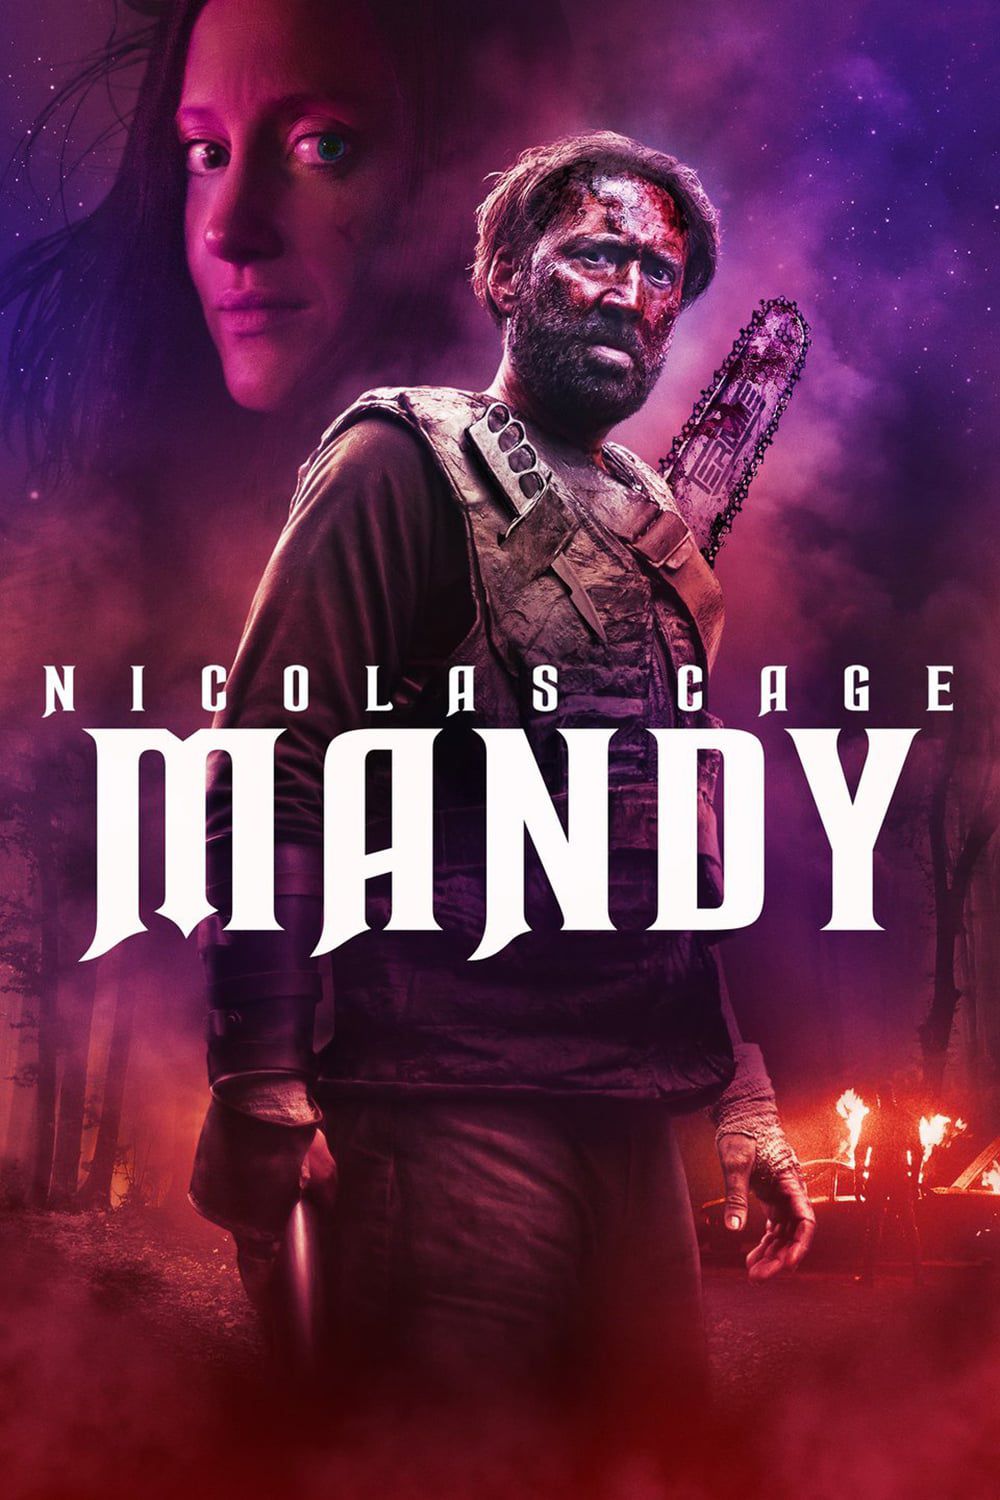 Mandy - Film (2018) streaming VF gratuit complet